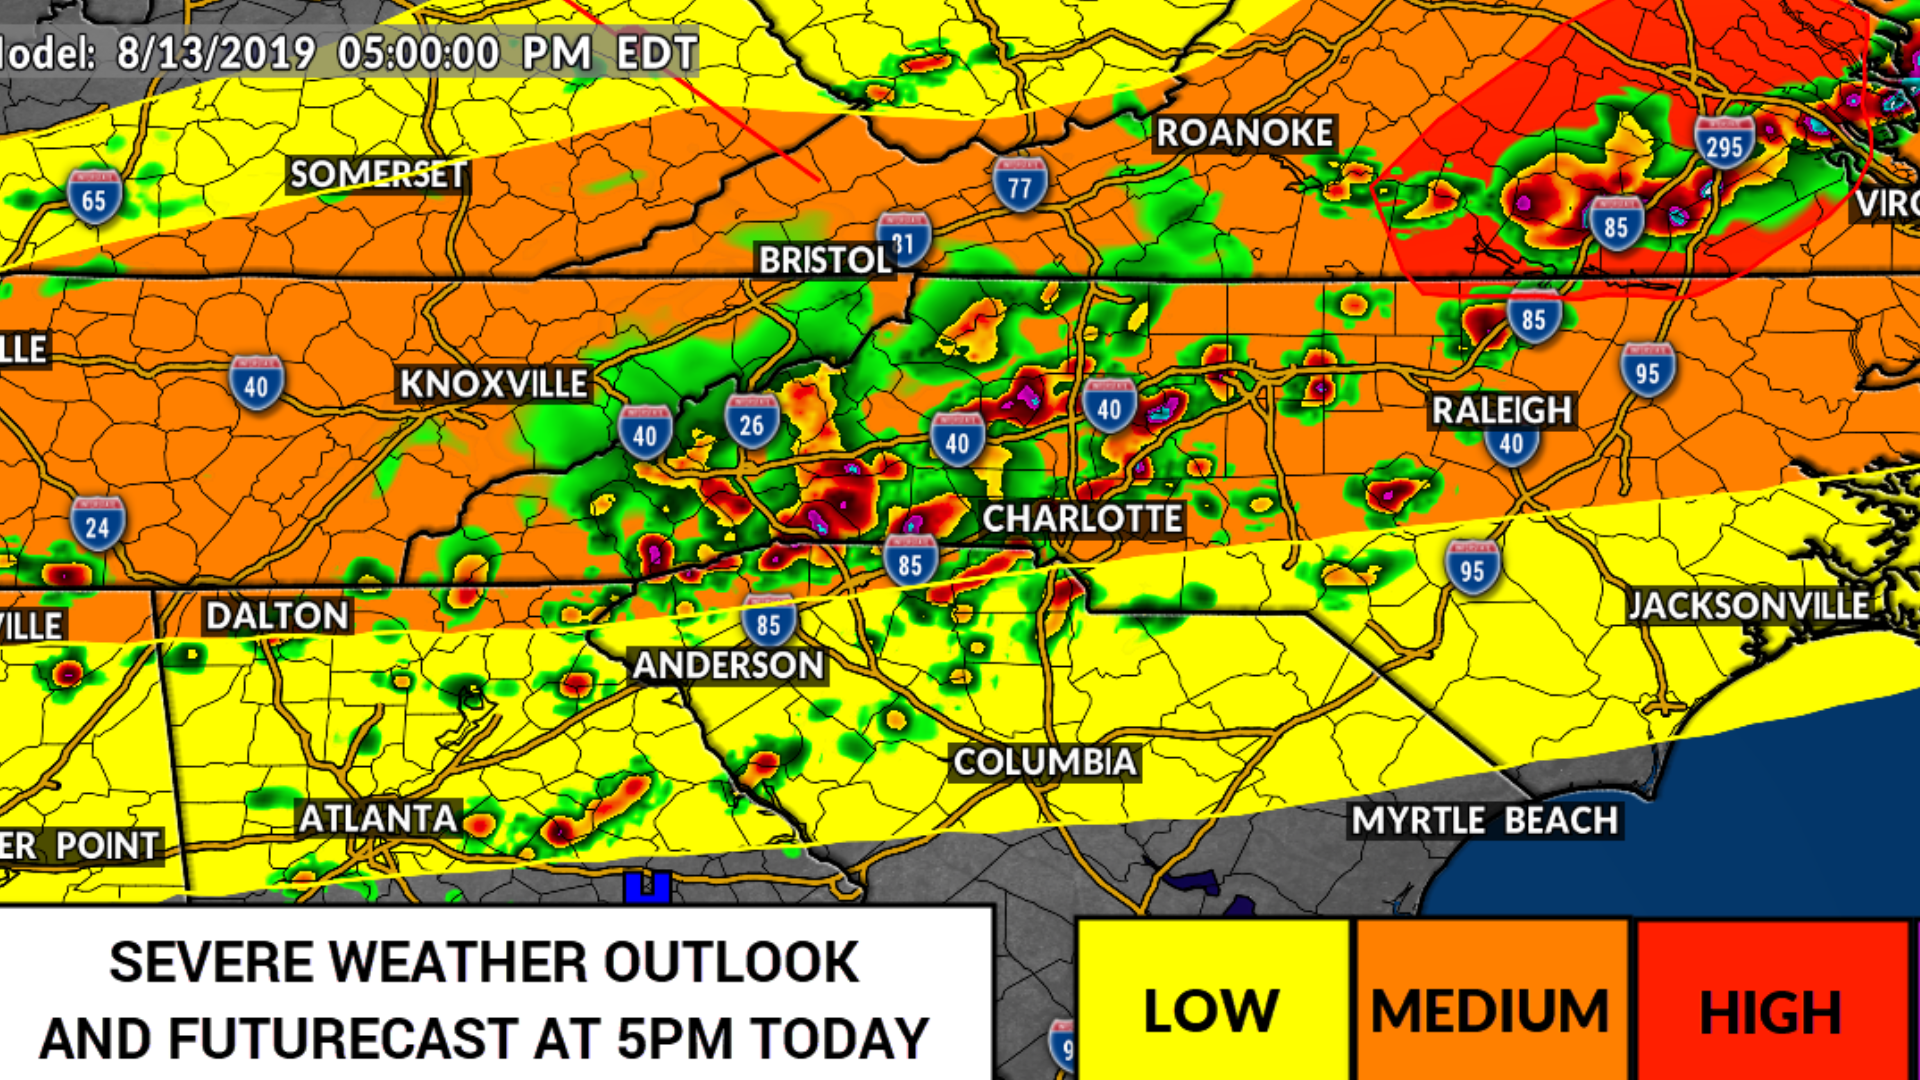 A line of strong to severe thunderstorms is expected to move through the Charlotte area Tuesday evening with the threat of damaging winds and heavy rain.